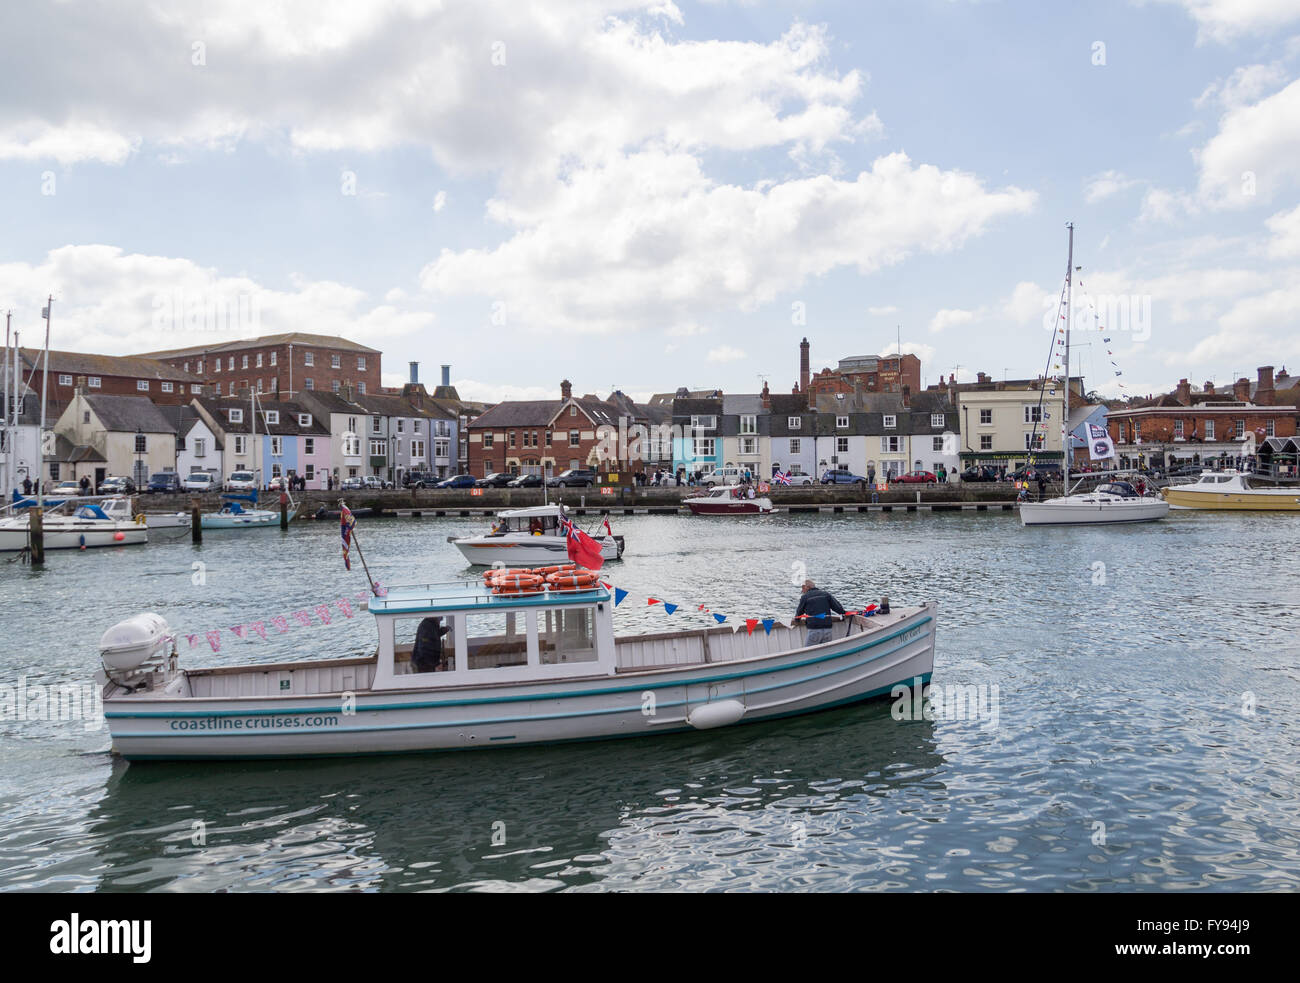 Weymouth, England. 23 April 2016. Queen's 90th Birthday Floating Tribute. Coastline Cruises boat (ex-Dunkirk). Credit:  Frances Underwood/Alamy Live News Stock Photo